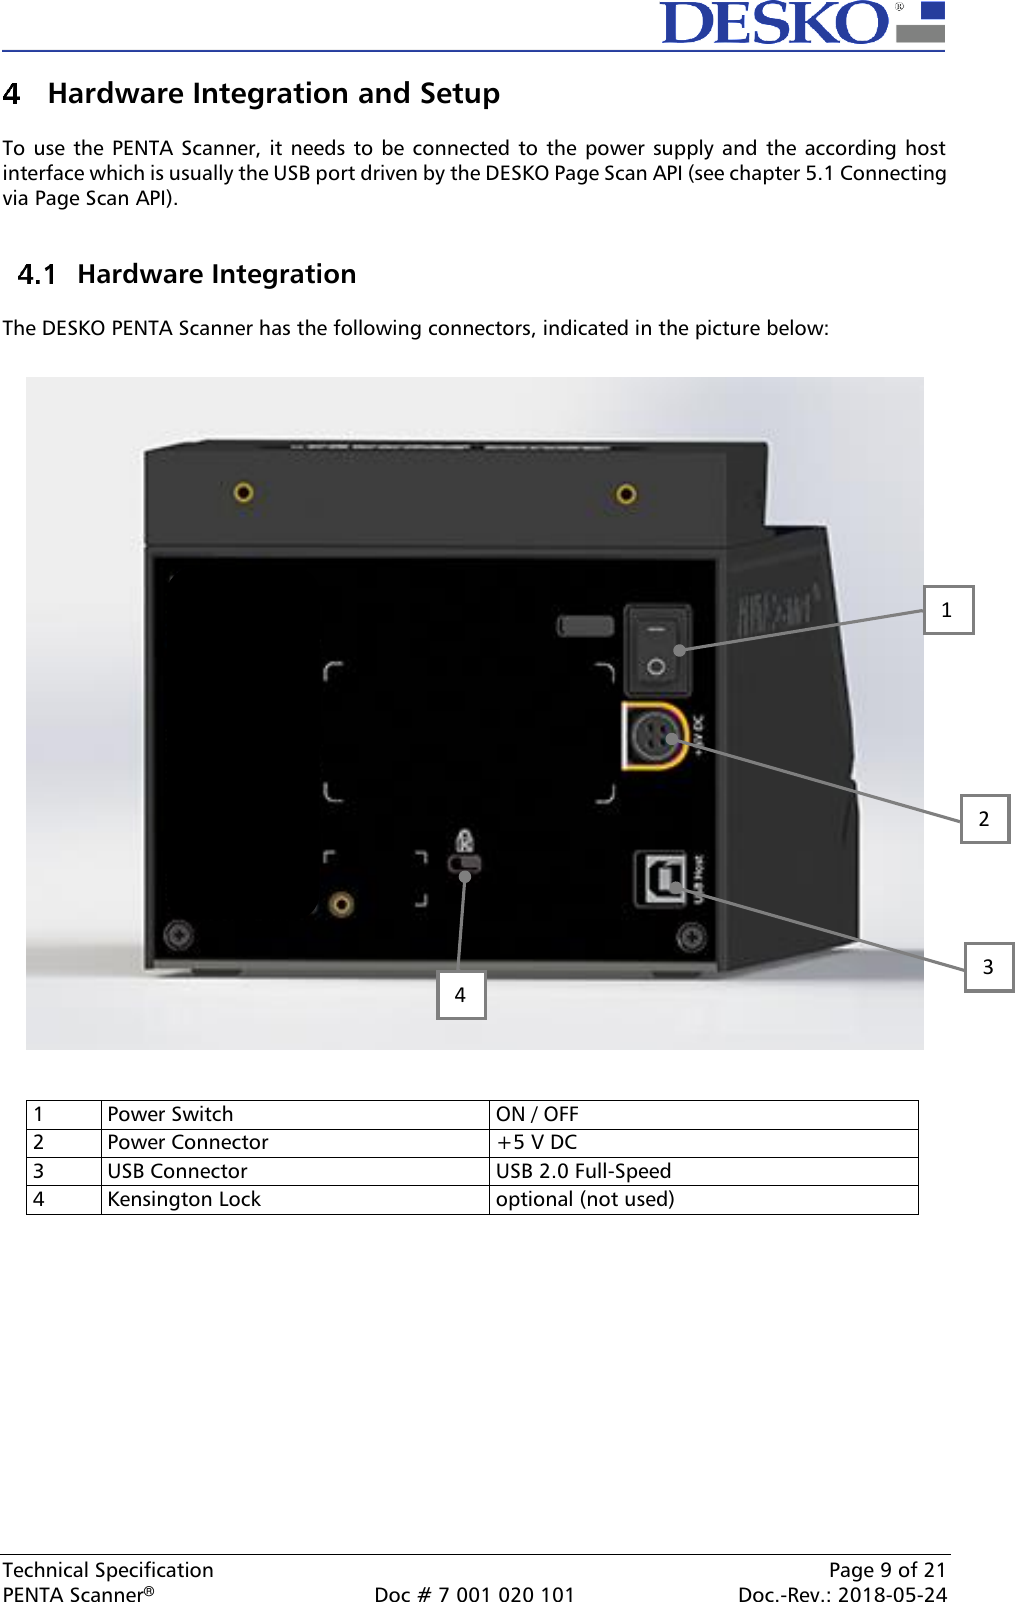  Technical Specification    Page 9 of 21 PENTA Scanner®  Doc # 7 001 020 101  Doc.-Rev.: 2018-05-24  Hardware Integration and Setup  To use the  PENTA Scanner, it needs  to be  connected to the  power  supply  and the according host interface which is usually the USB port driven by the DESKO Page Scan API (see chapter 5.1 Connecting via Page Scan API).    Hardware Integration  The DESKO PENTA Scanner has the following connectors, indicated in the picture below:     1 Power Switch ON / OFF 2 Power Connector +5 V DC 3 USB Connector USB 2.0 Full-Speed 4 Kensington Lock optional (not used)     2 1 4 3 